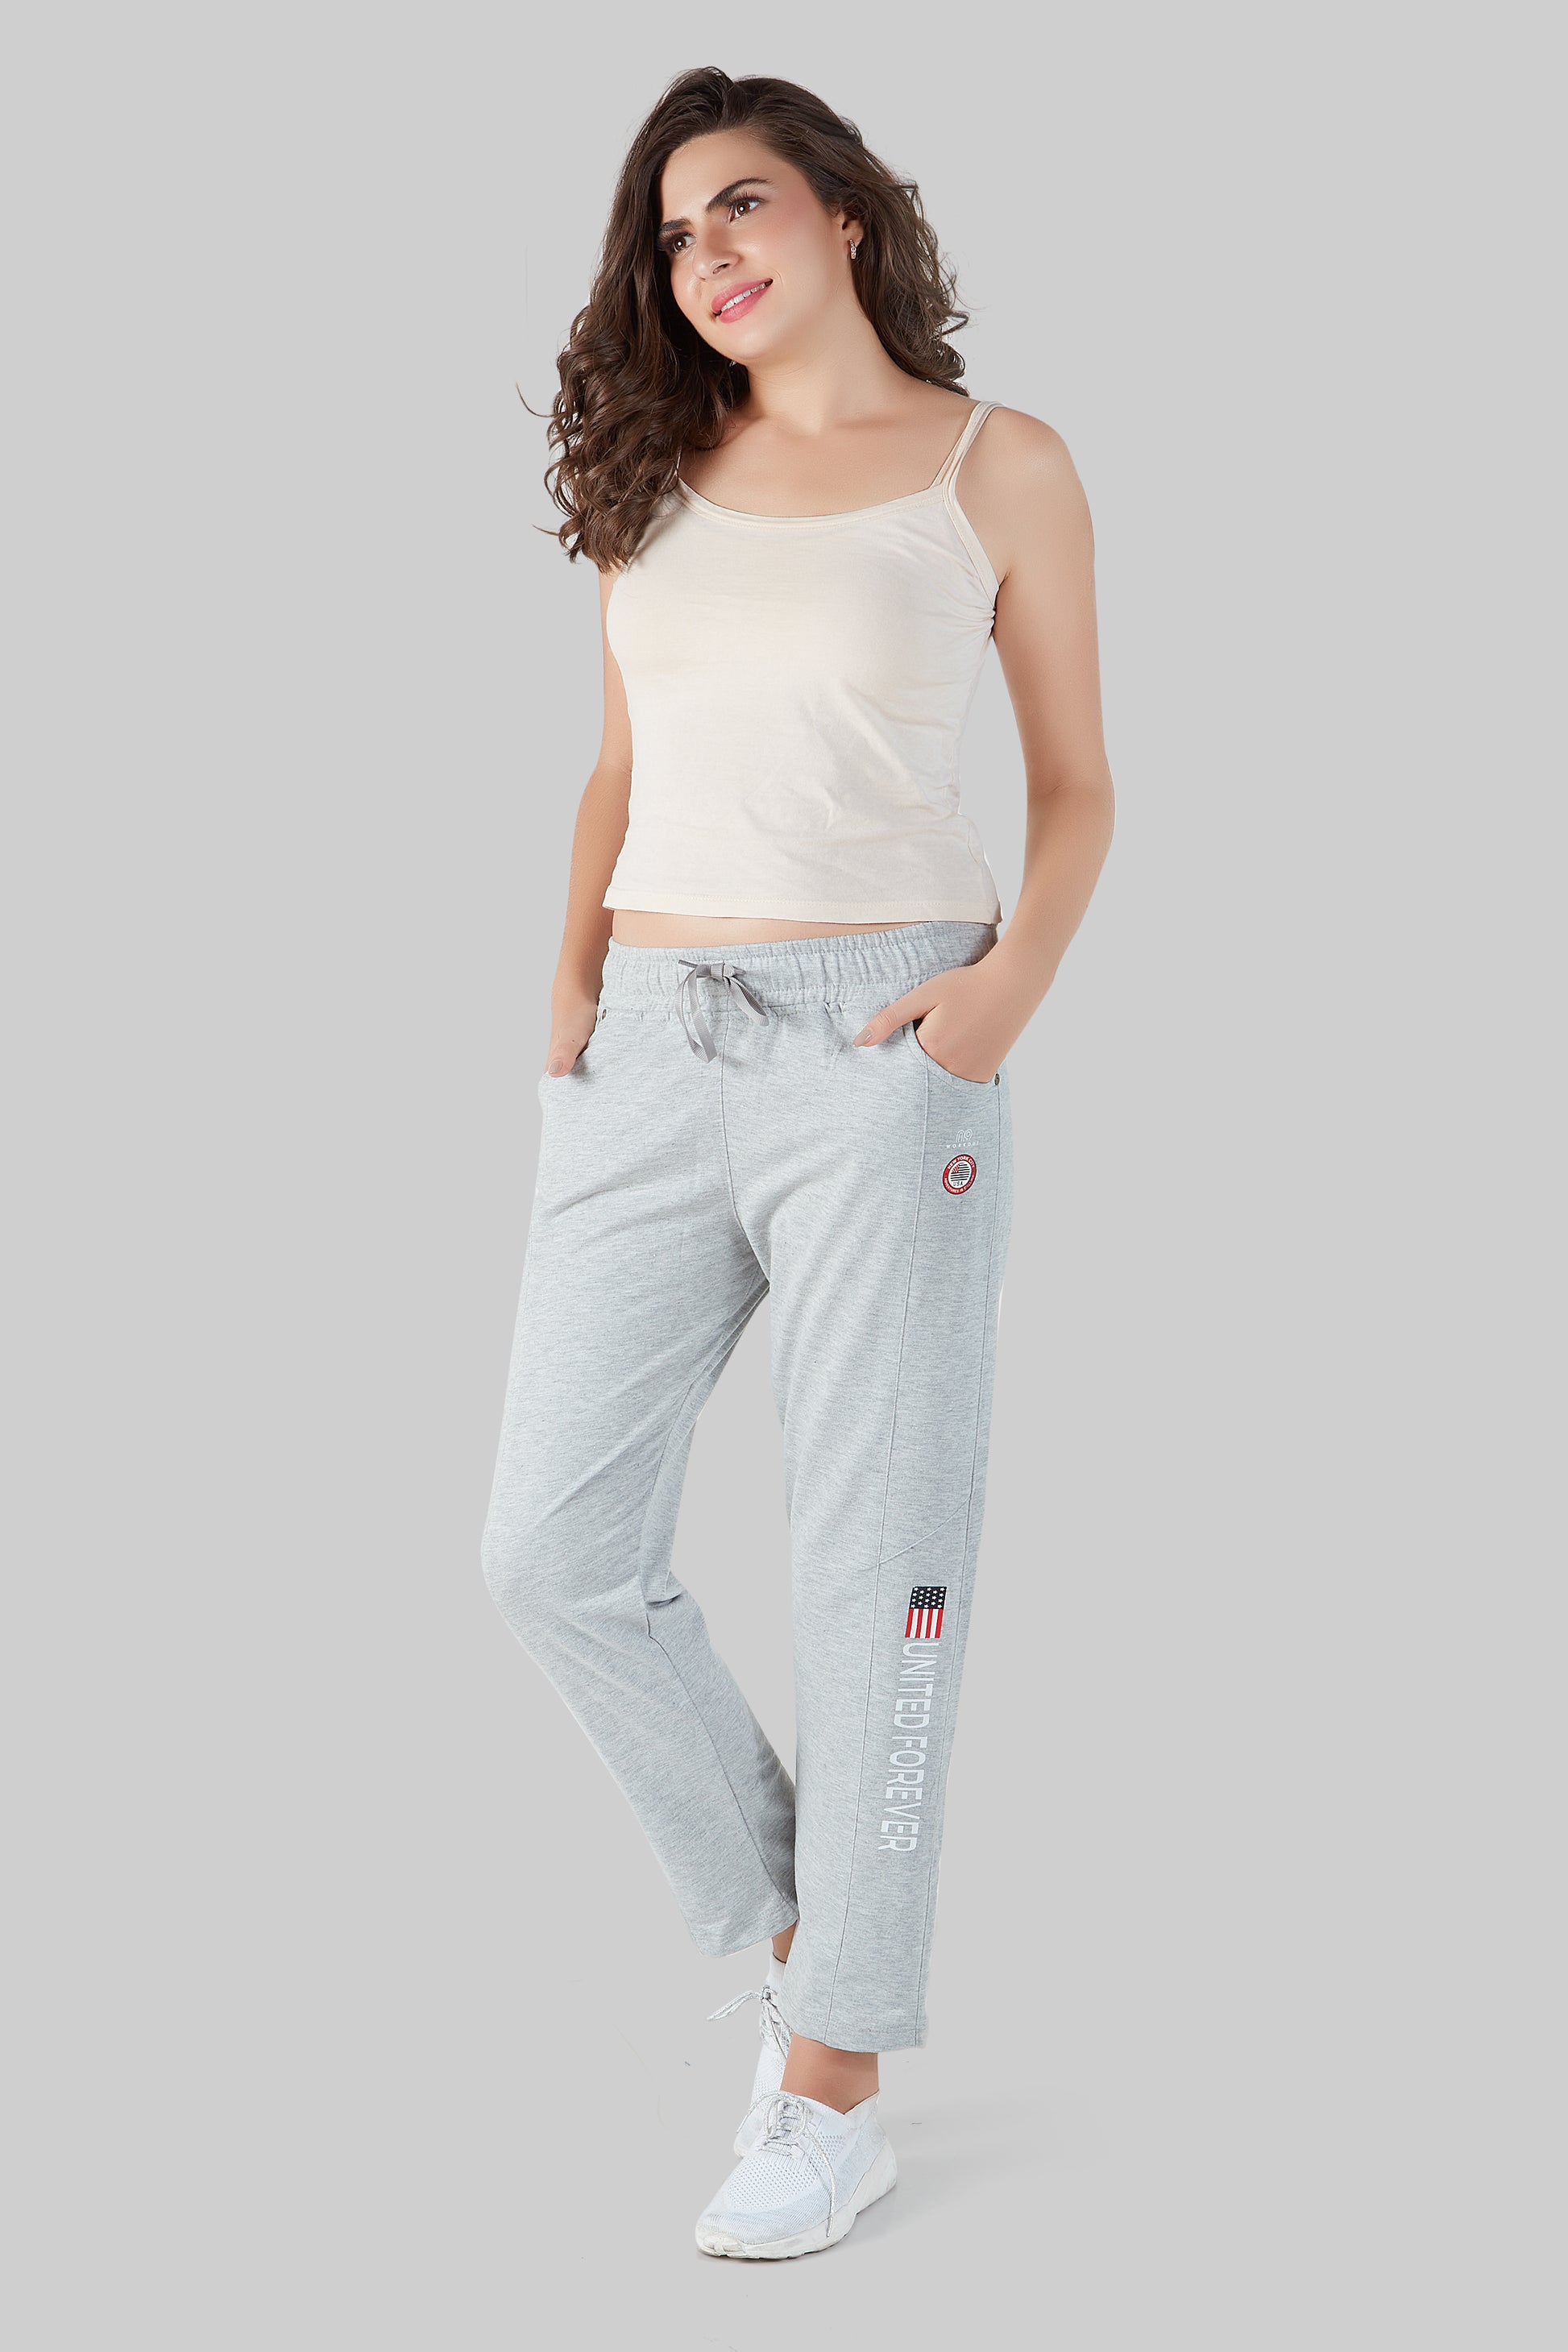 Soft Cotton Regular Fit Lounge Pants At Best Prices